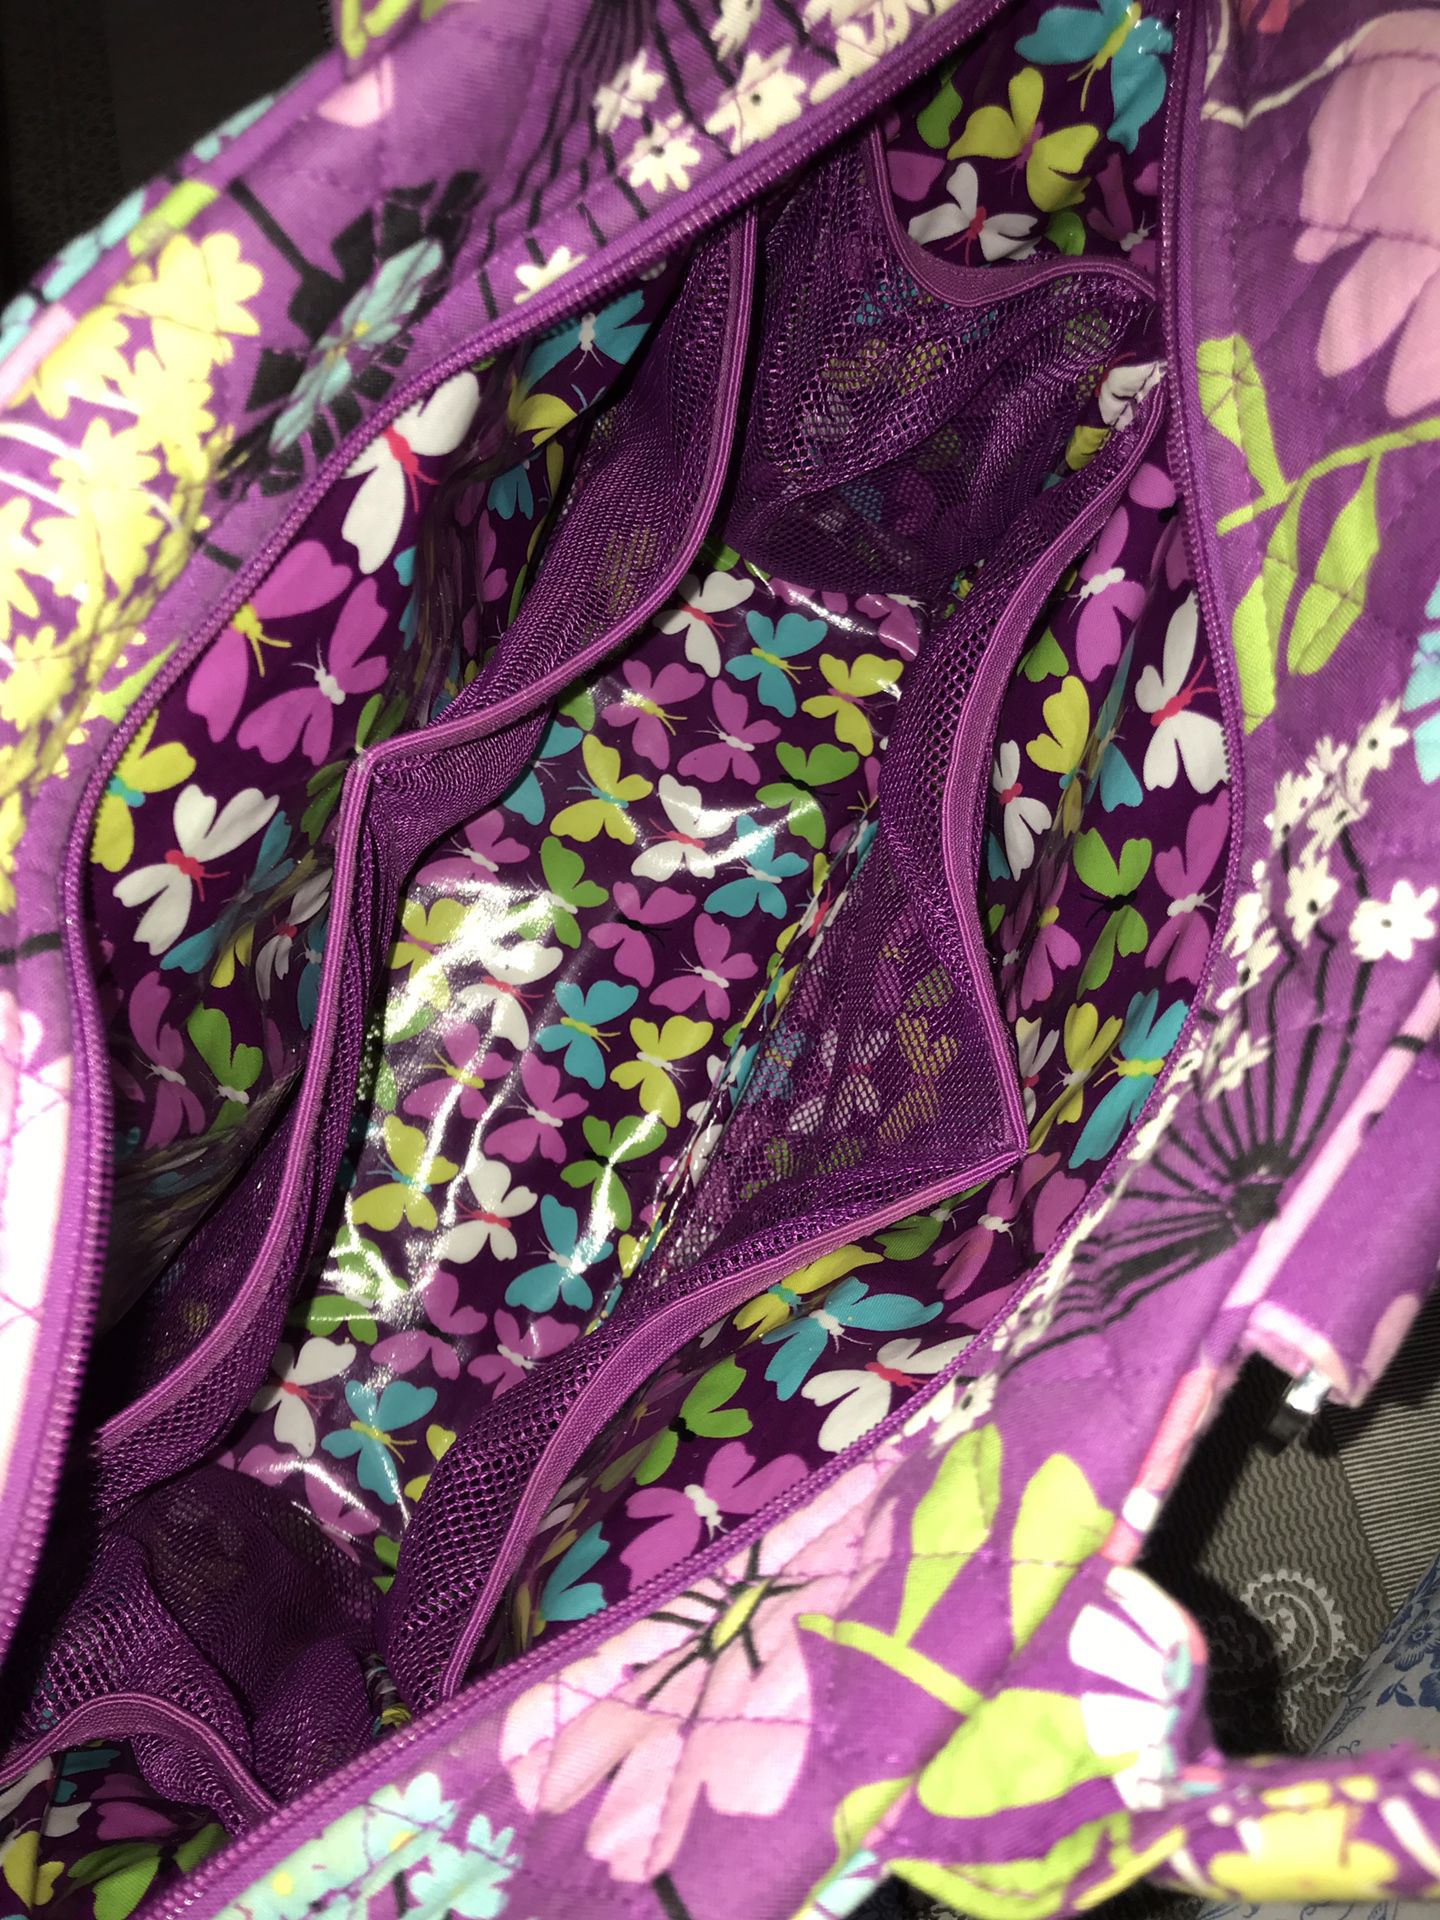 diaper bag from Vera Bradley almost new in great condition for baby girl